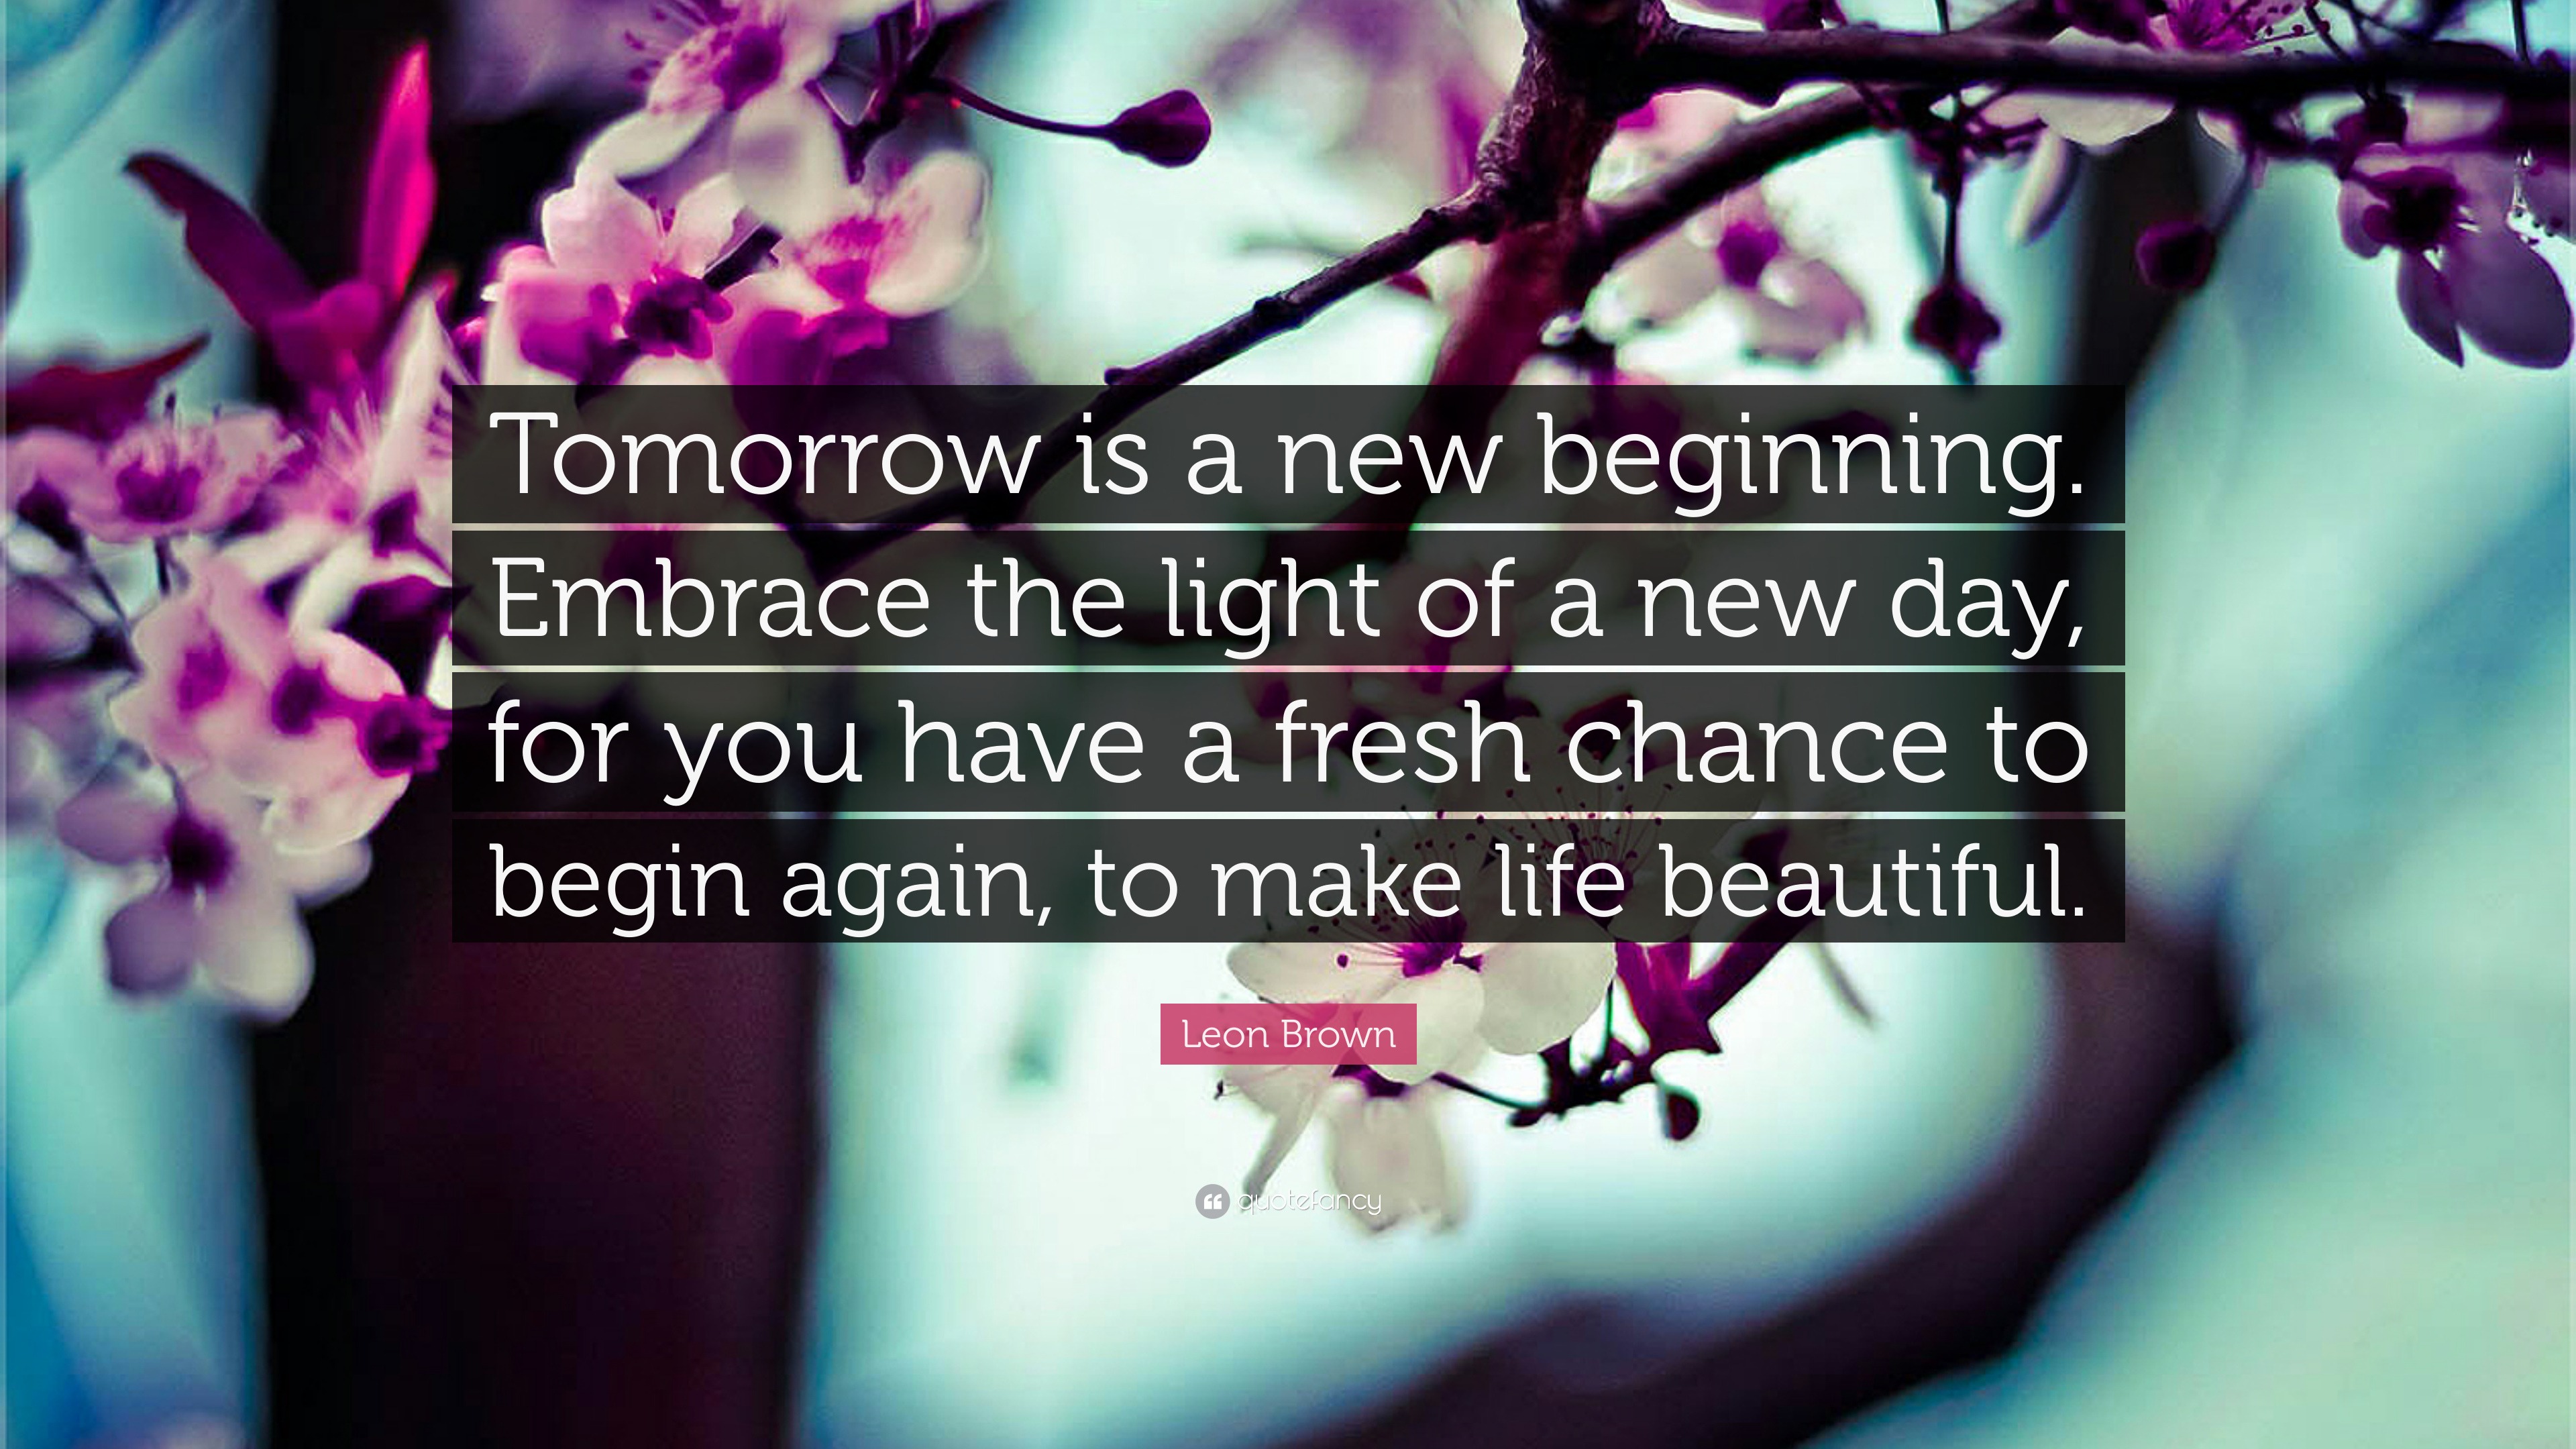 Leon Brown Quote “Tomorrow is a new beginning Embrace the light of a